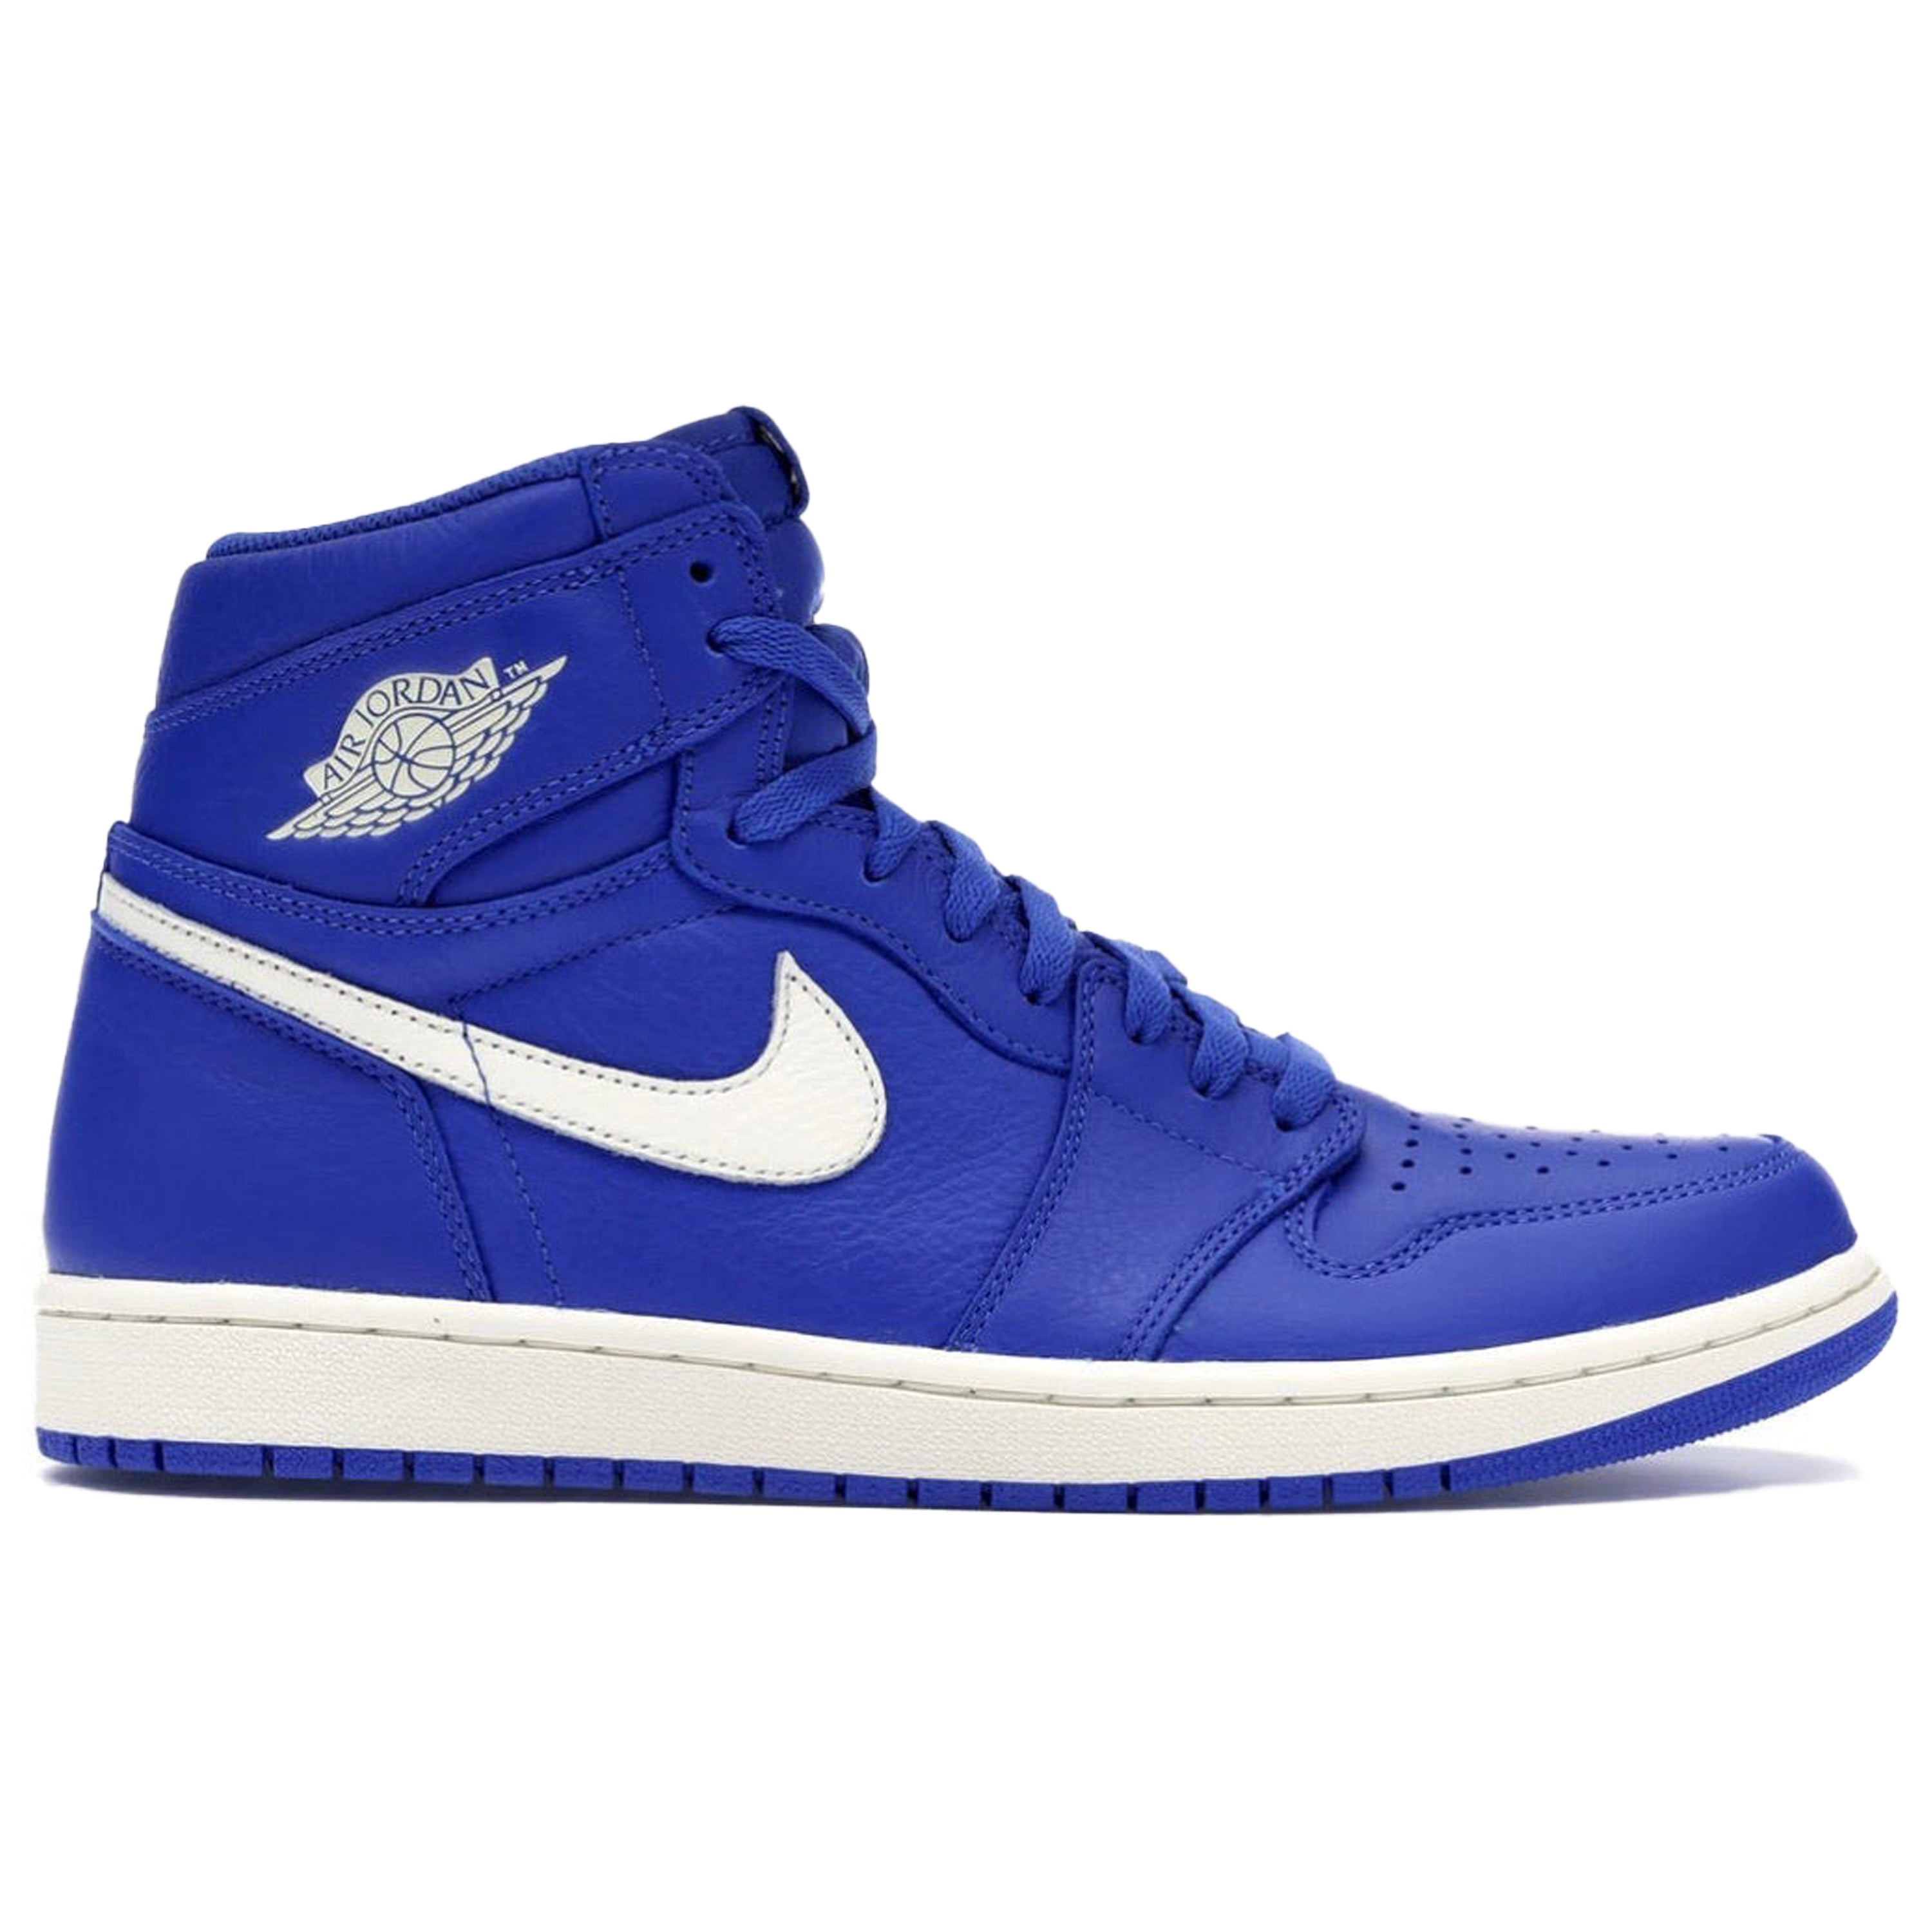 Pre-Owned] Nike Air Jordan 1 High “Hyper Royal” – The Come Up